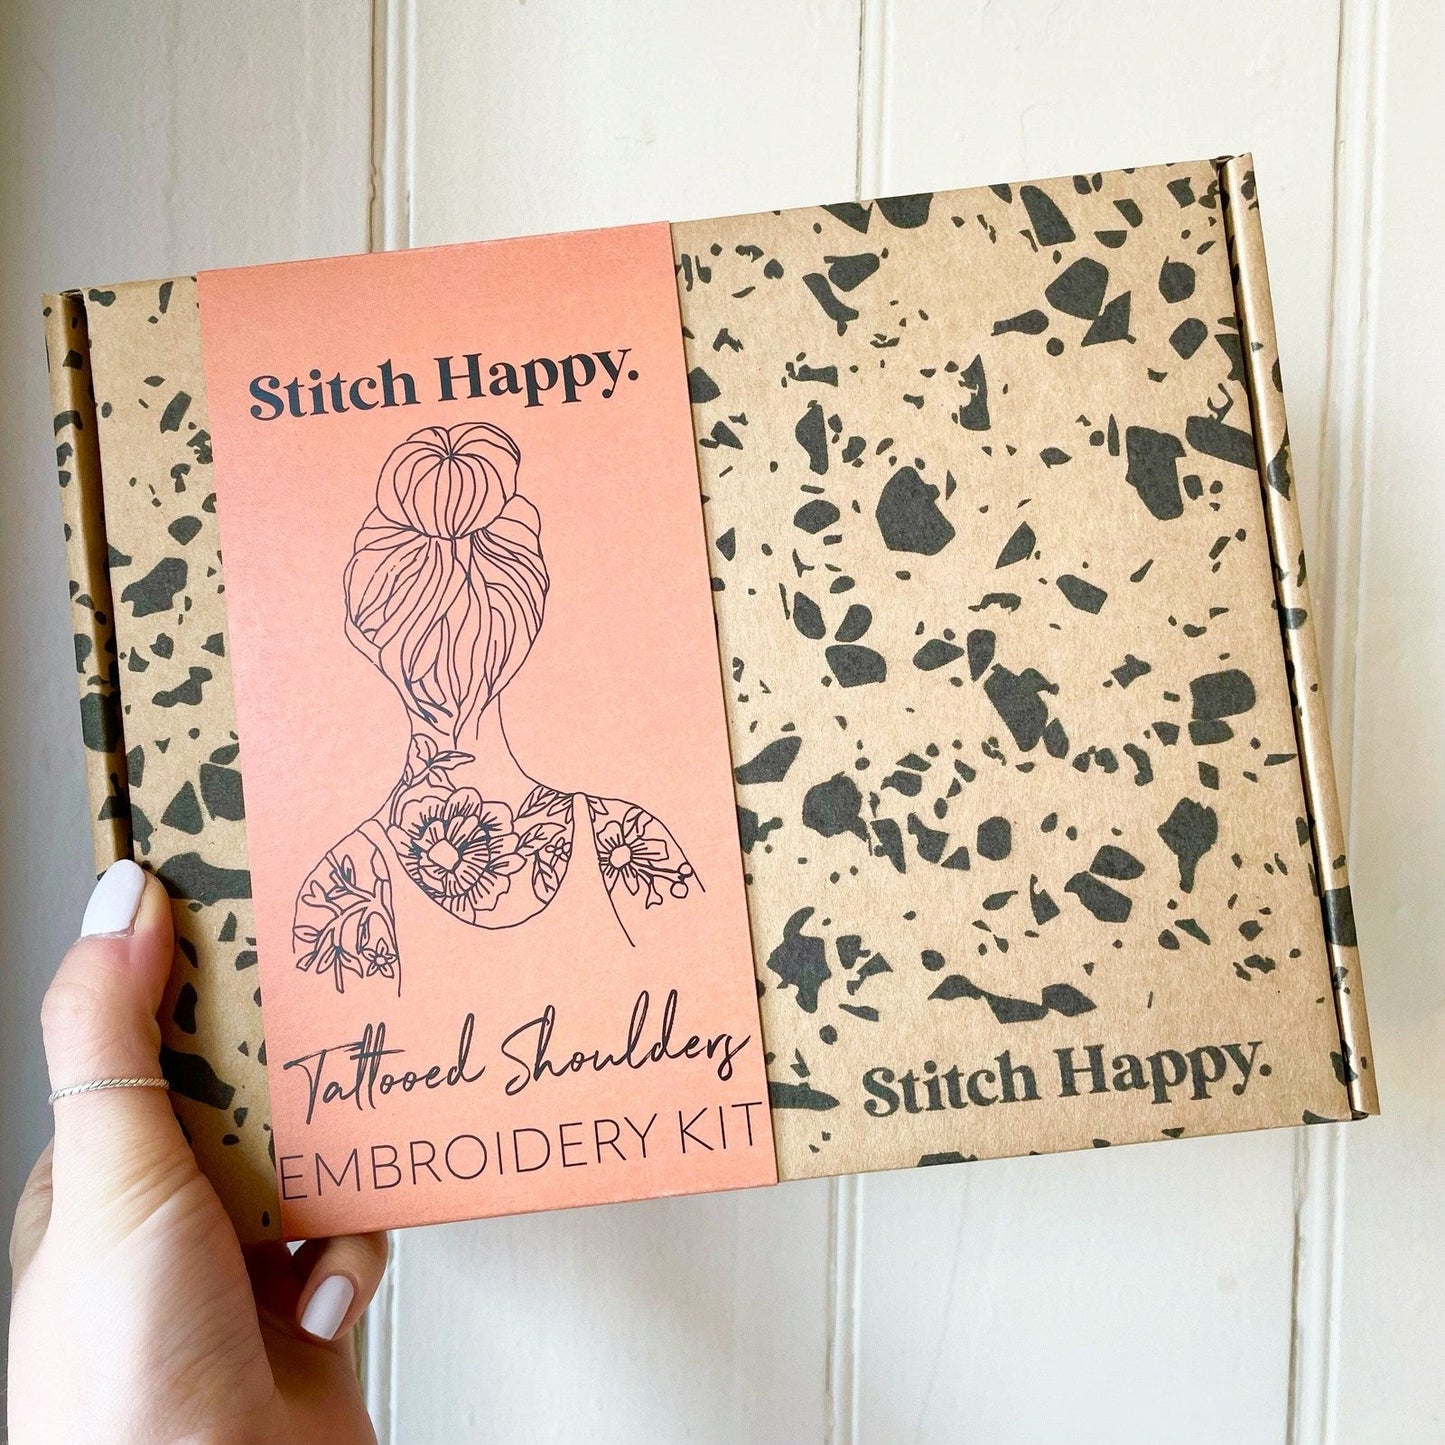 Stitch Happy Embroidery Kit - Tattooed Shoulders